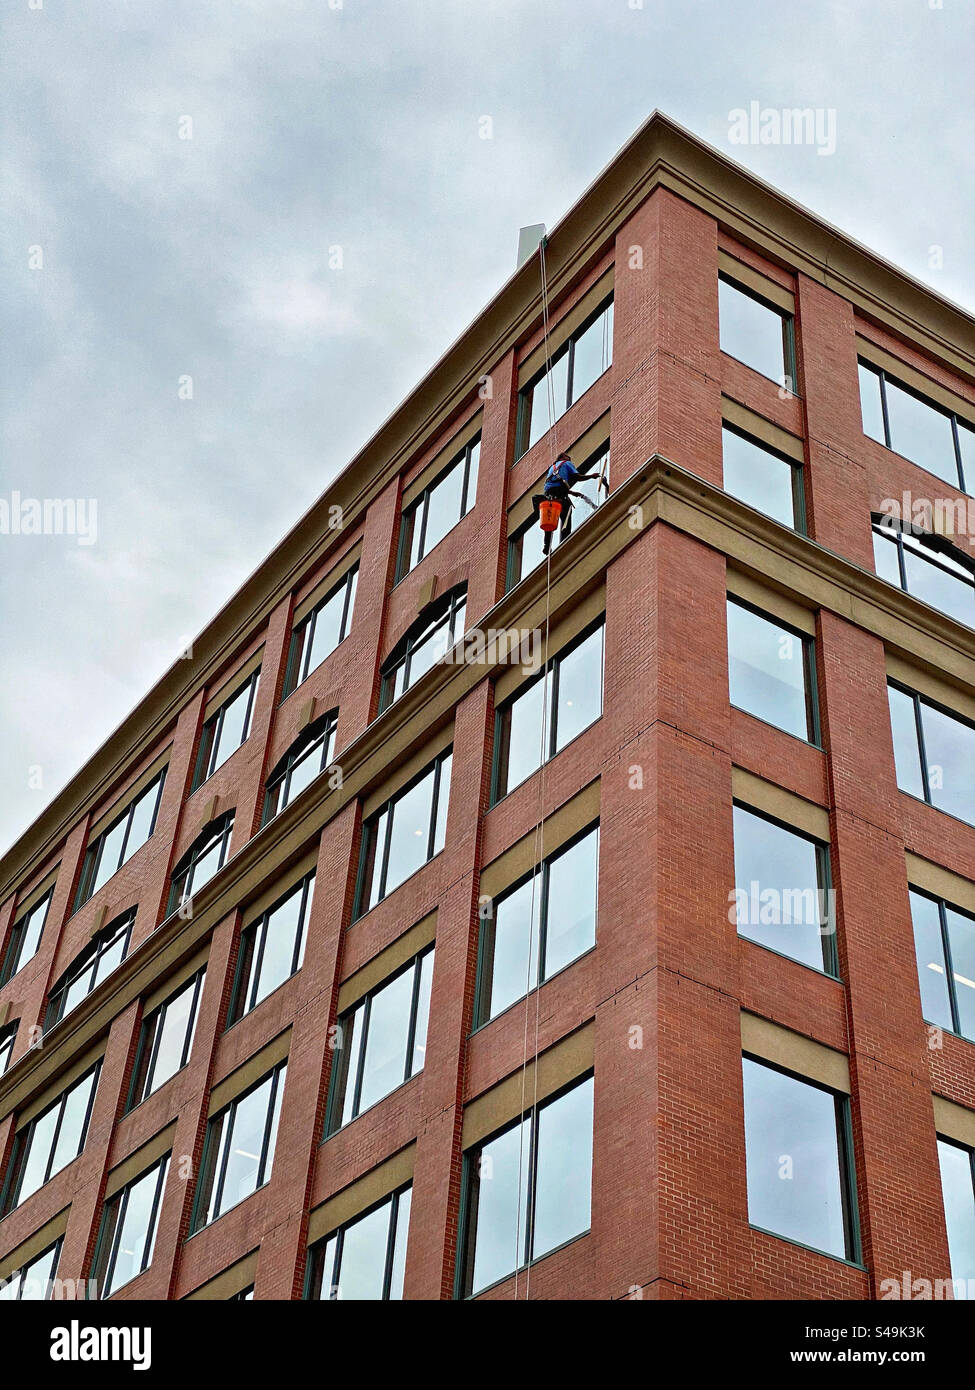 A window washer works alone, suspended from the roof of a tall brick building. Stock Photo